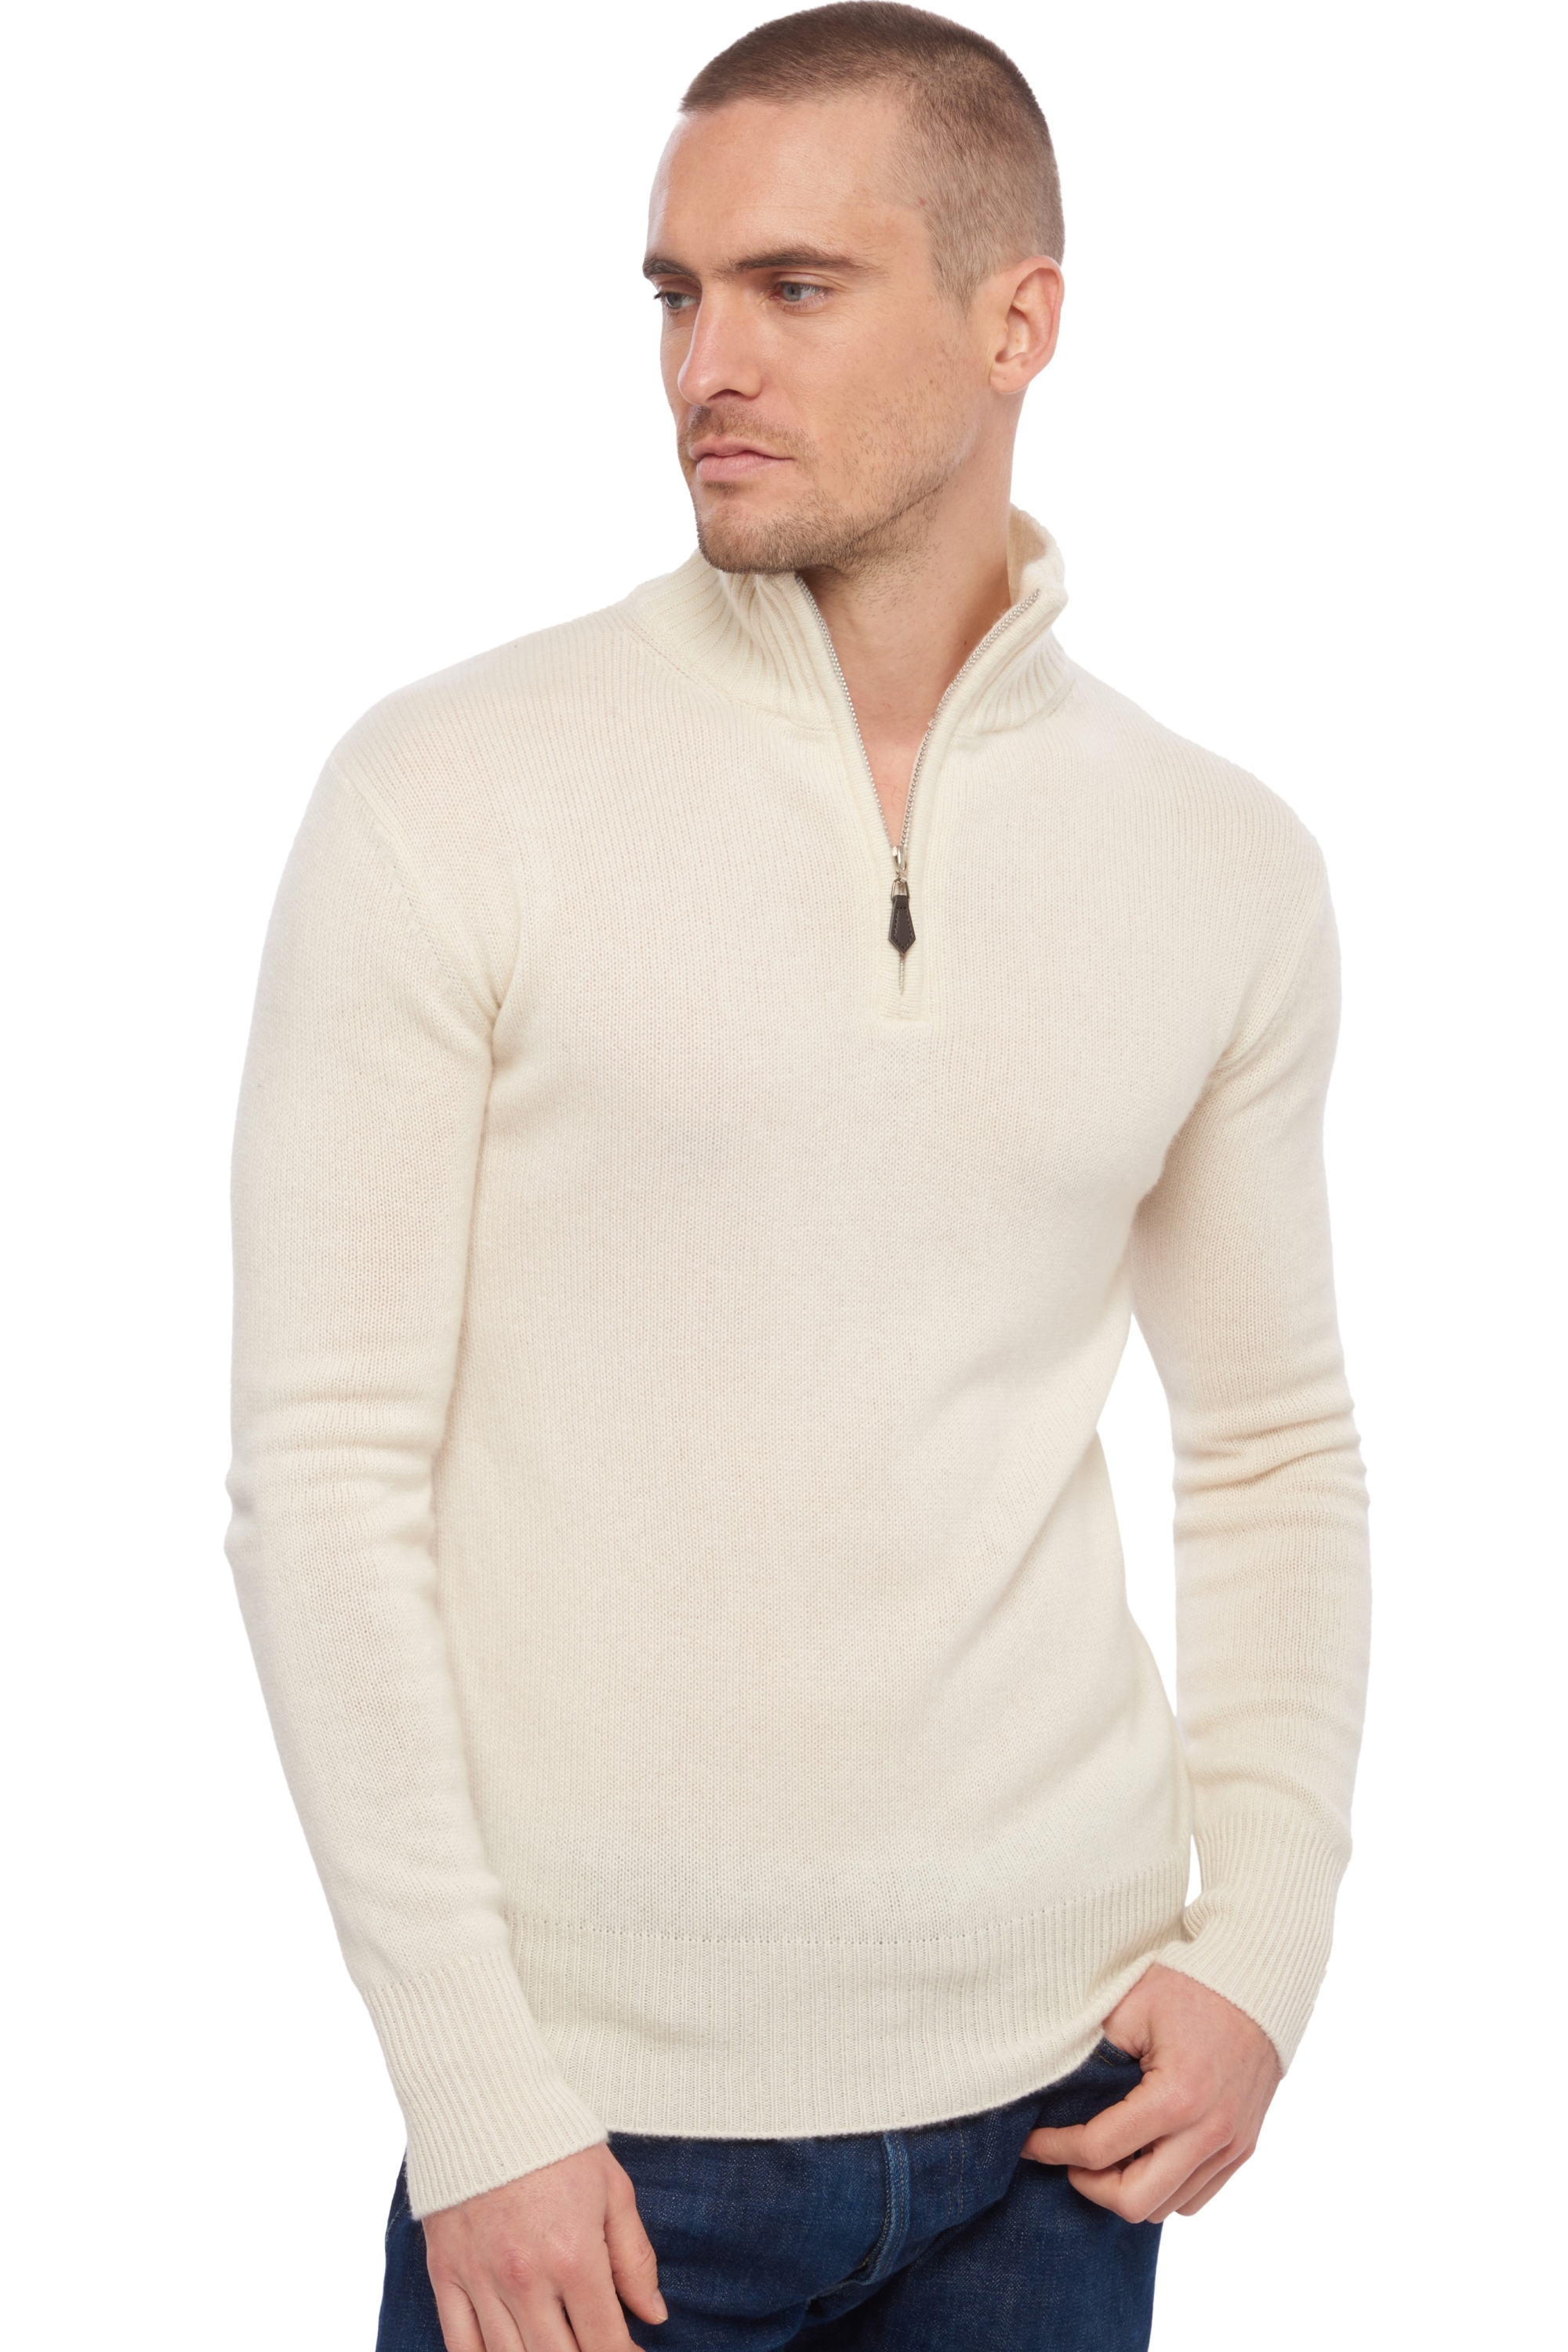 Cachemire pull homme donovan natural ecru s